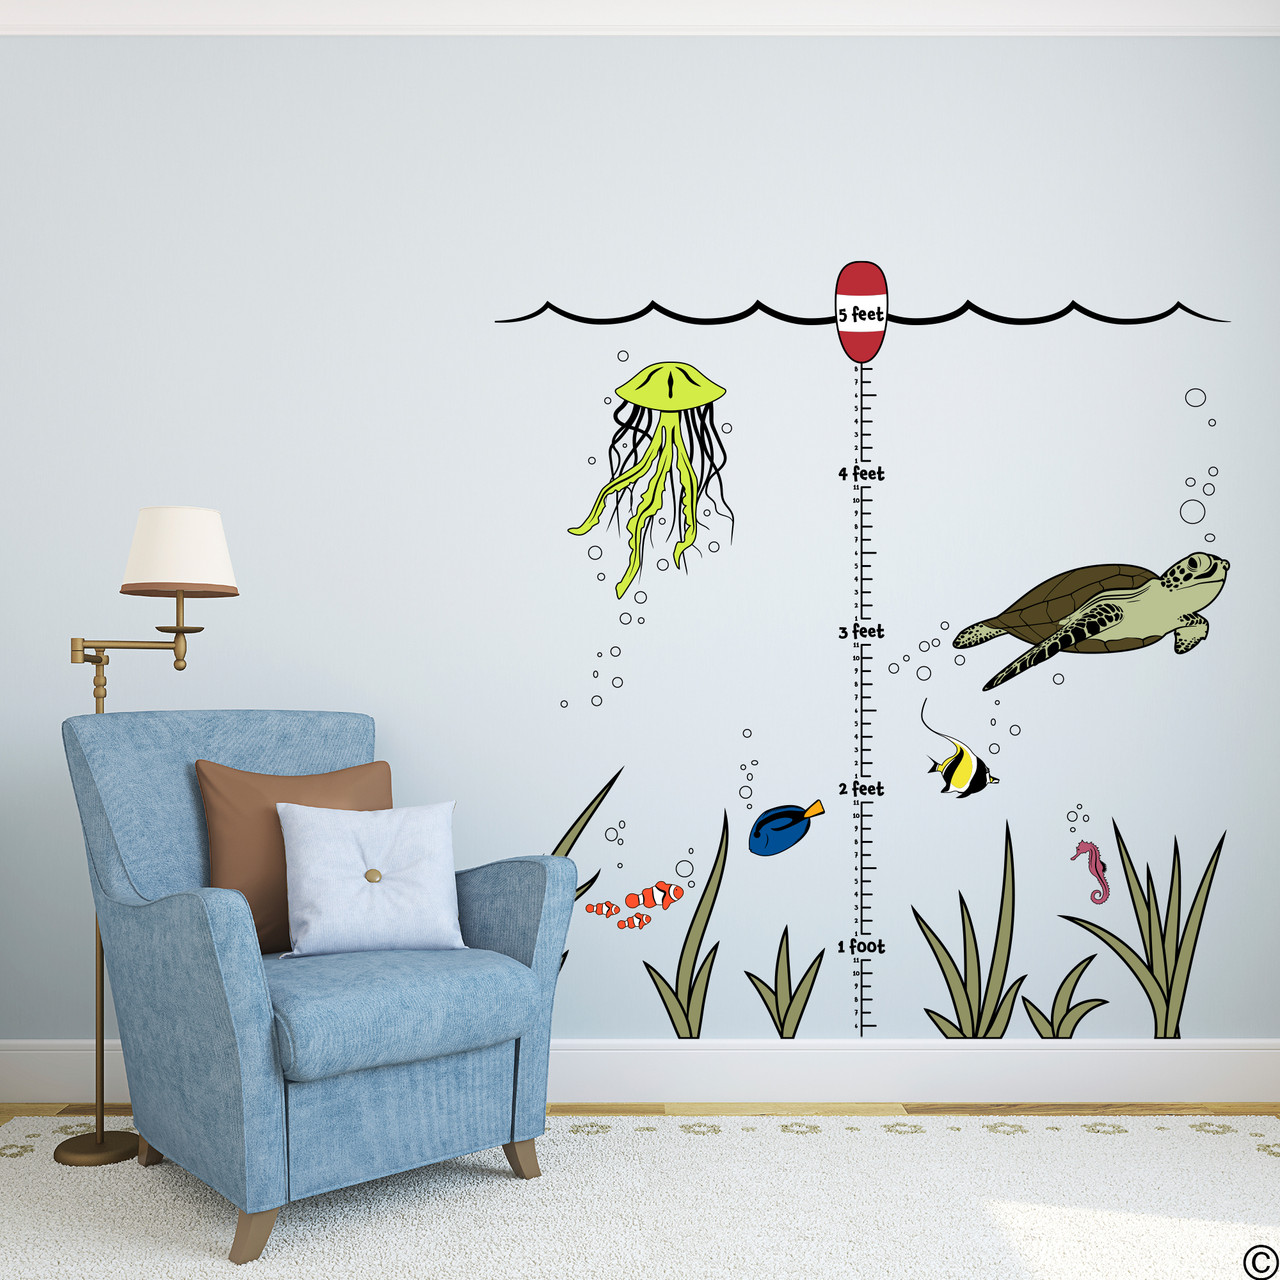 Under the sea growth ruler wall decal. Comes with 5 foot ruler, 1 buoy, waves, 1 sea turtle, 3 clown fish, 1 jellyfish, 6 seaweed tuffs, 1sea horse, 1 surgeonfish, 1 moorish idol fish, and a bunch of bubbles. Place them however you want or as seen here. 